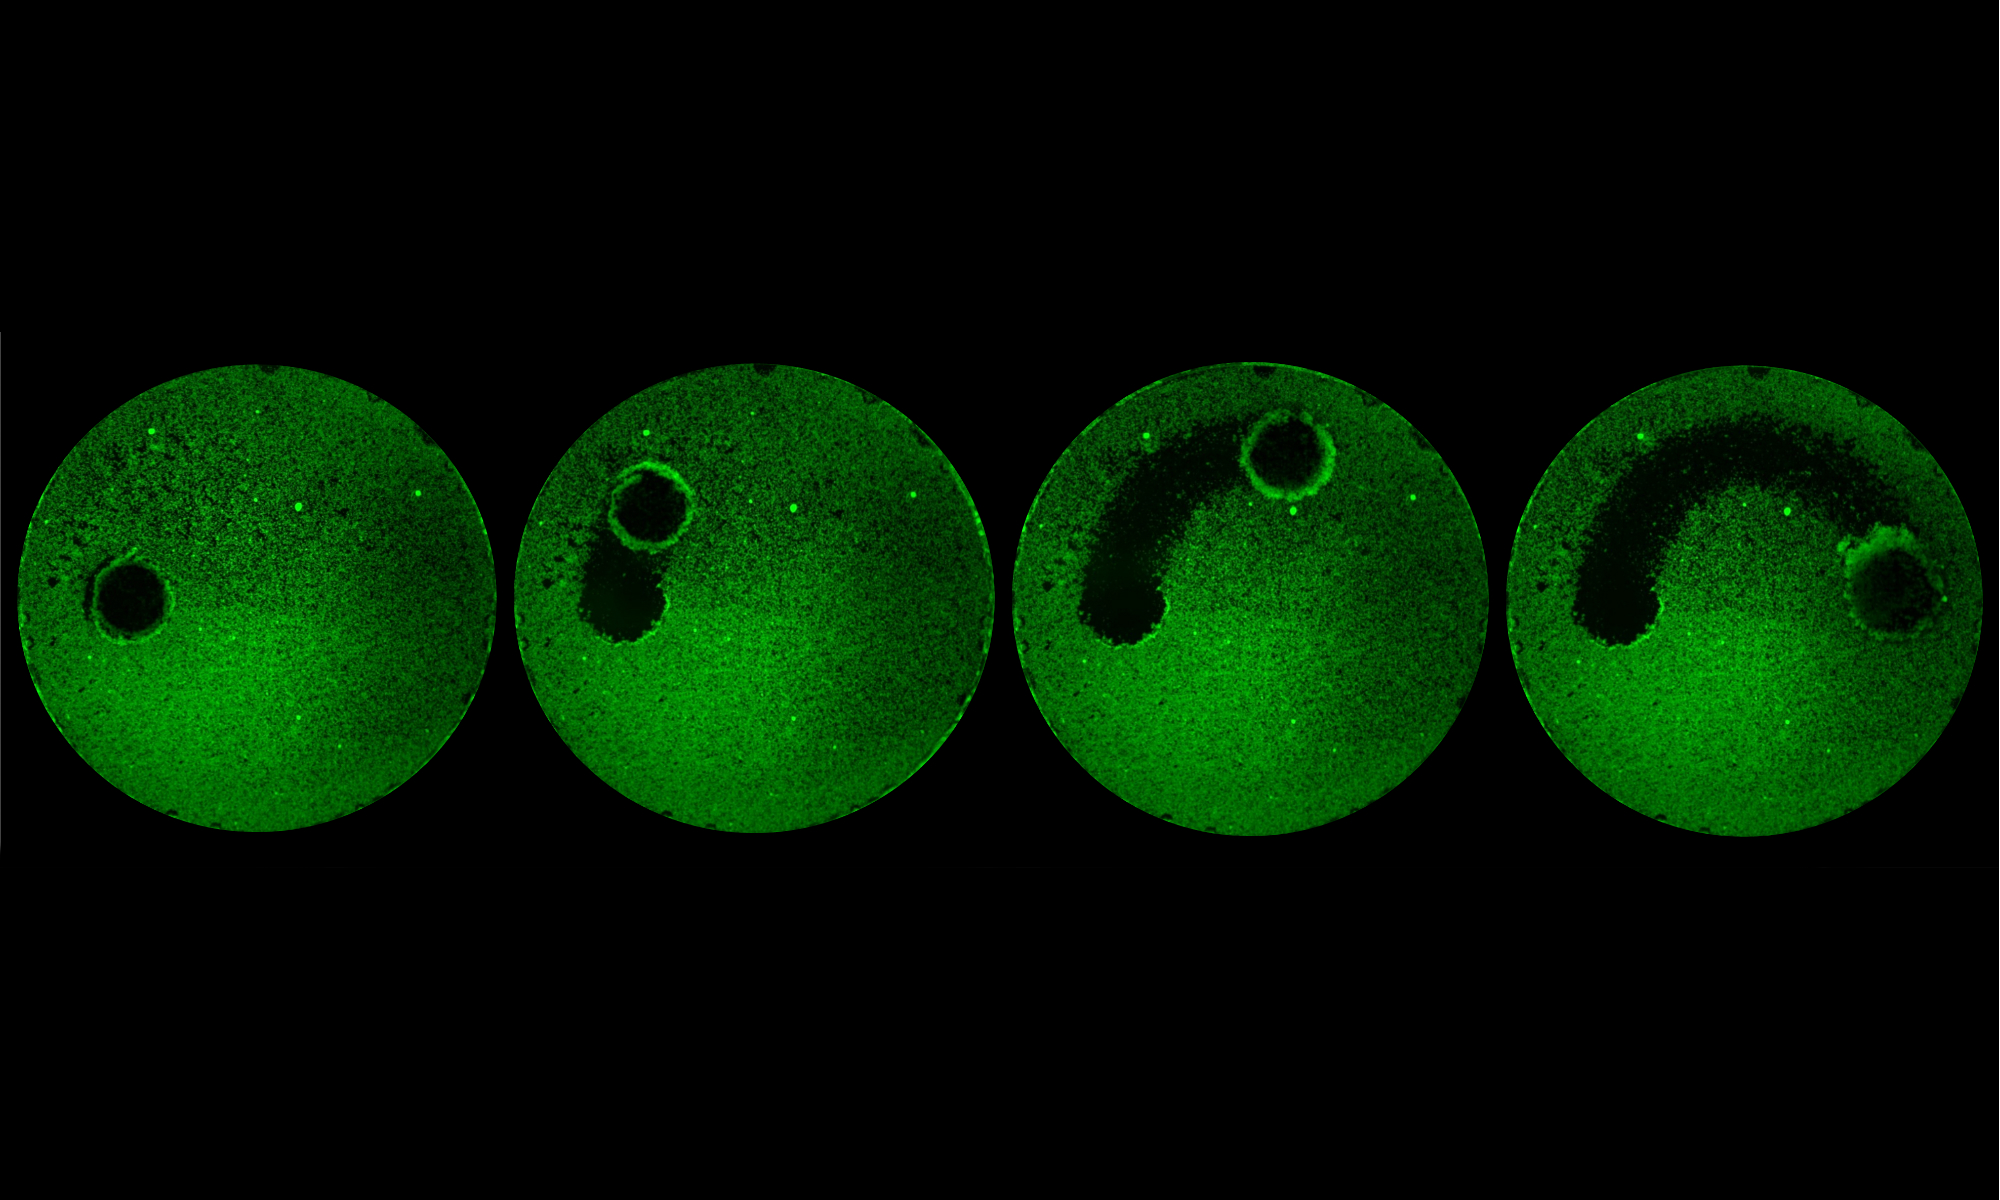 Time lapse photo of green circle shows a progressively larger cleared off area where a robot has removed a biofilm